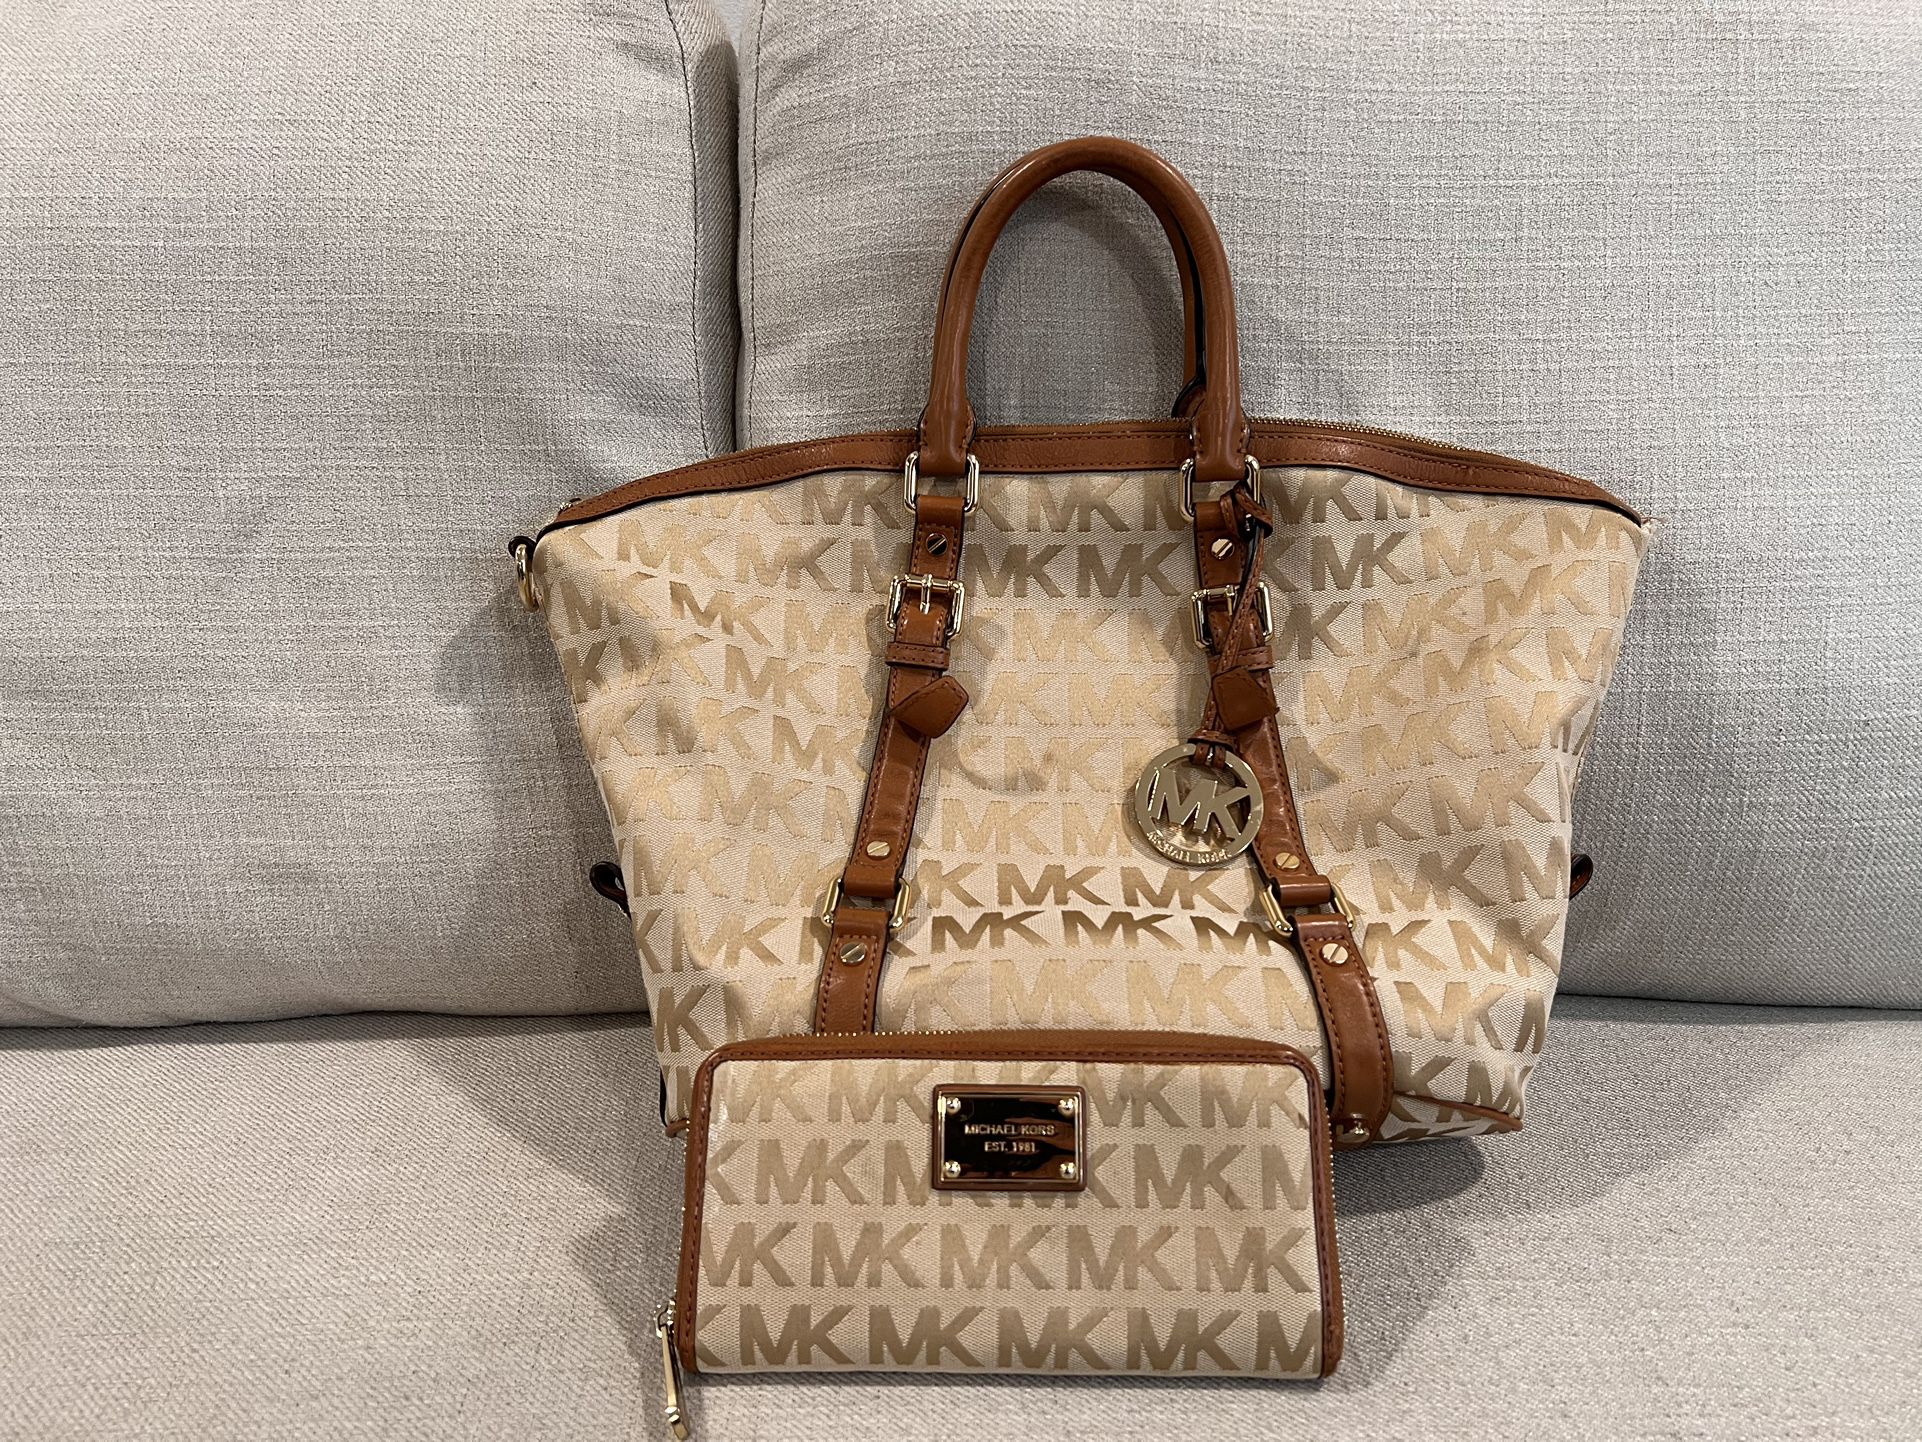 Michael Kors Purse & Wallet Set for Sale in Grove City, OH - OfferUp